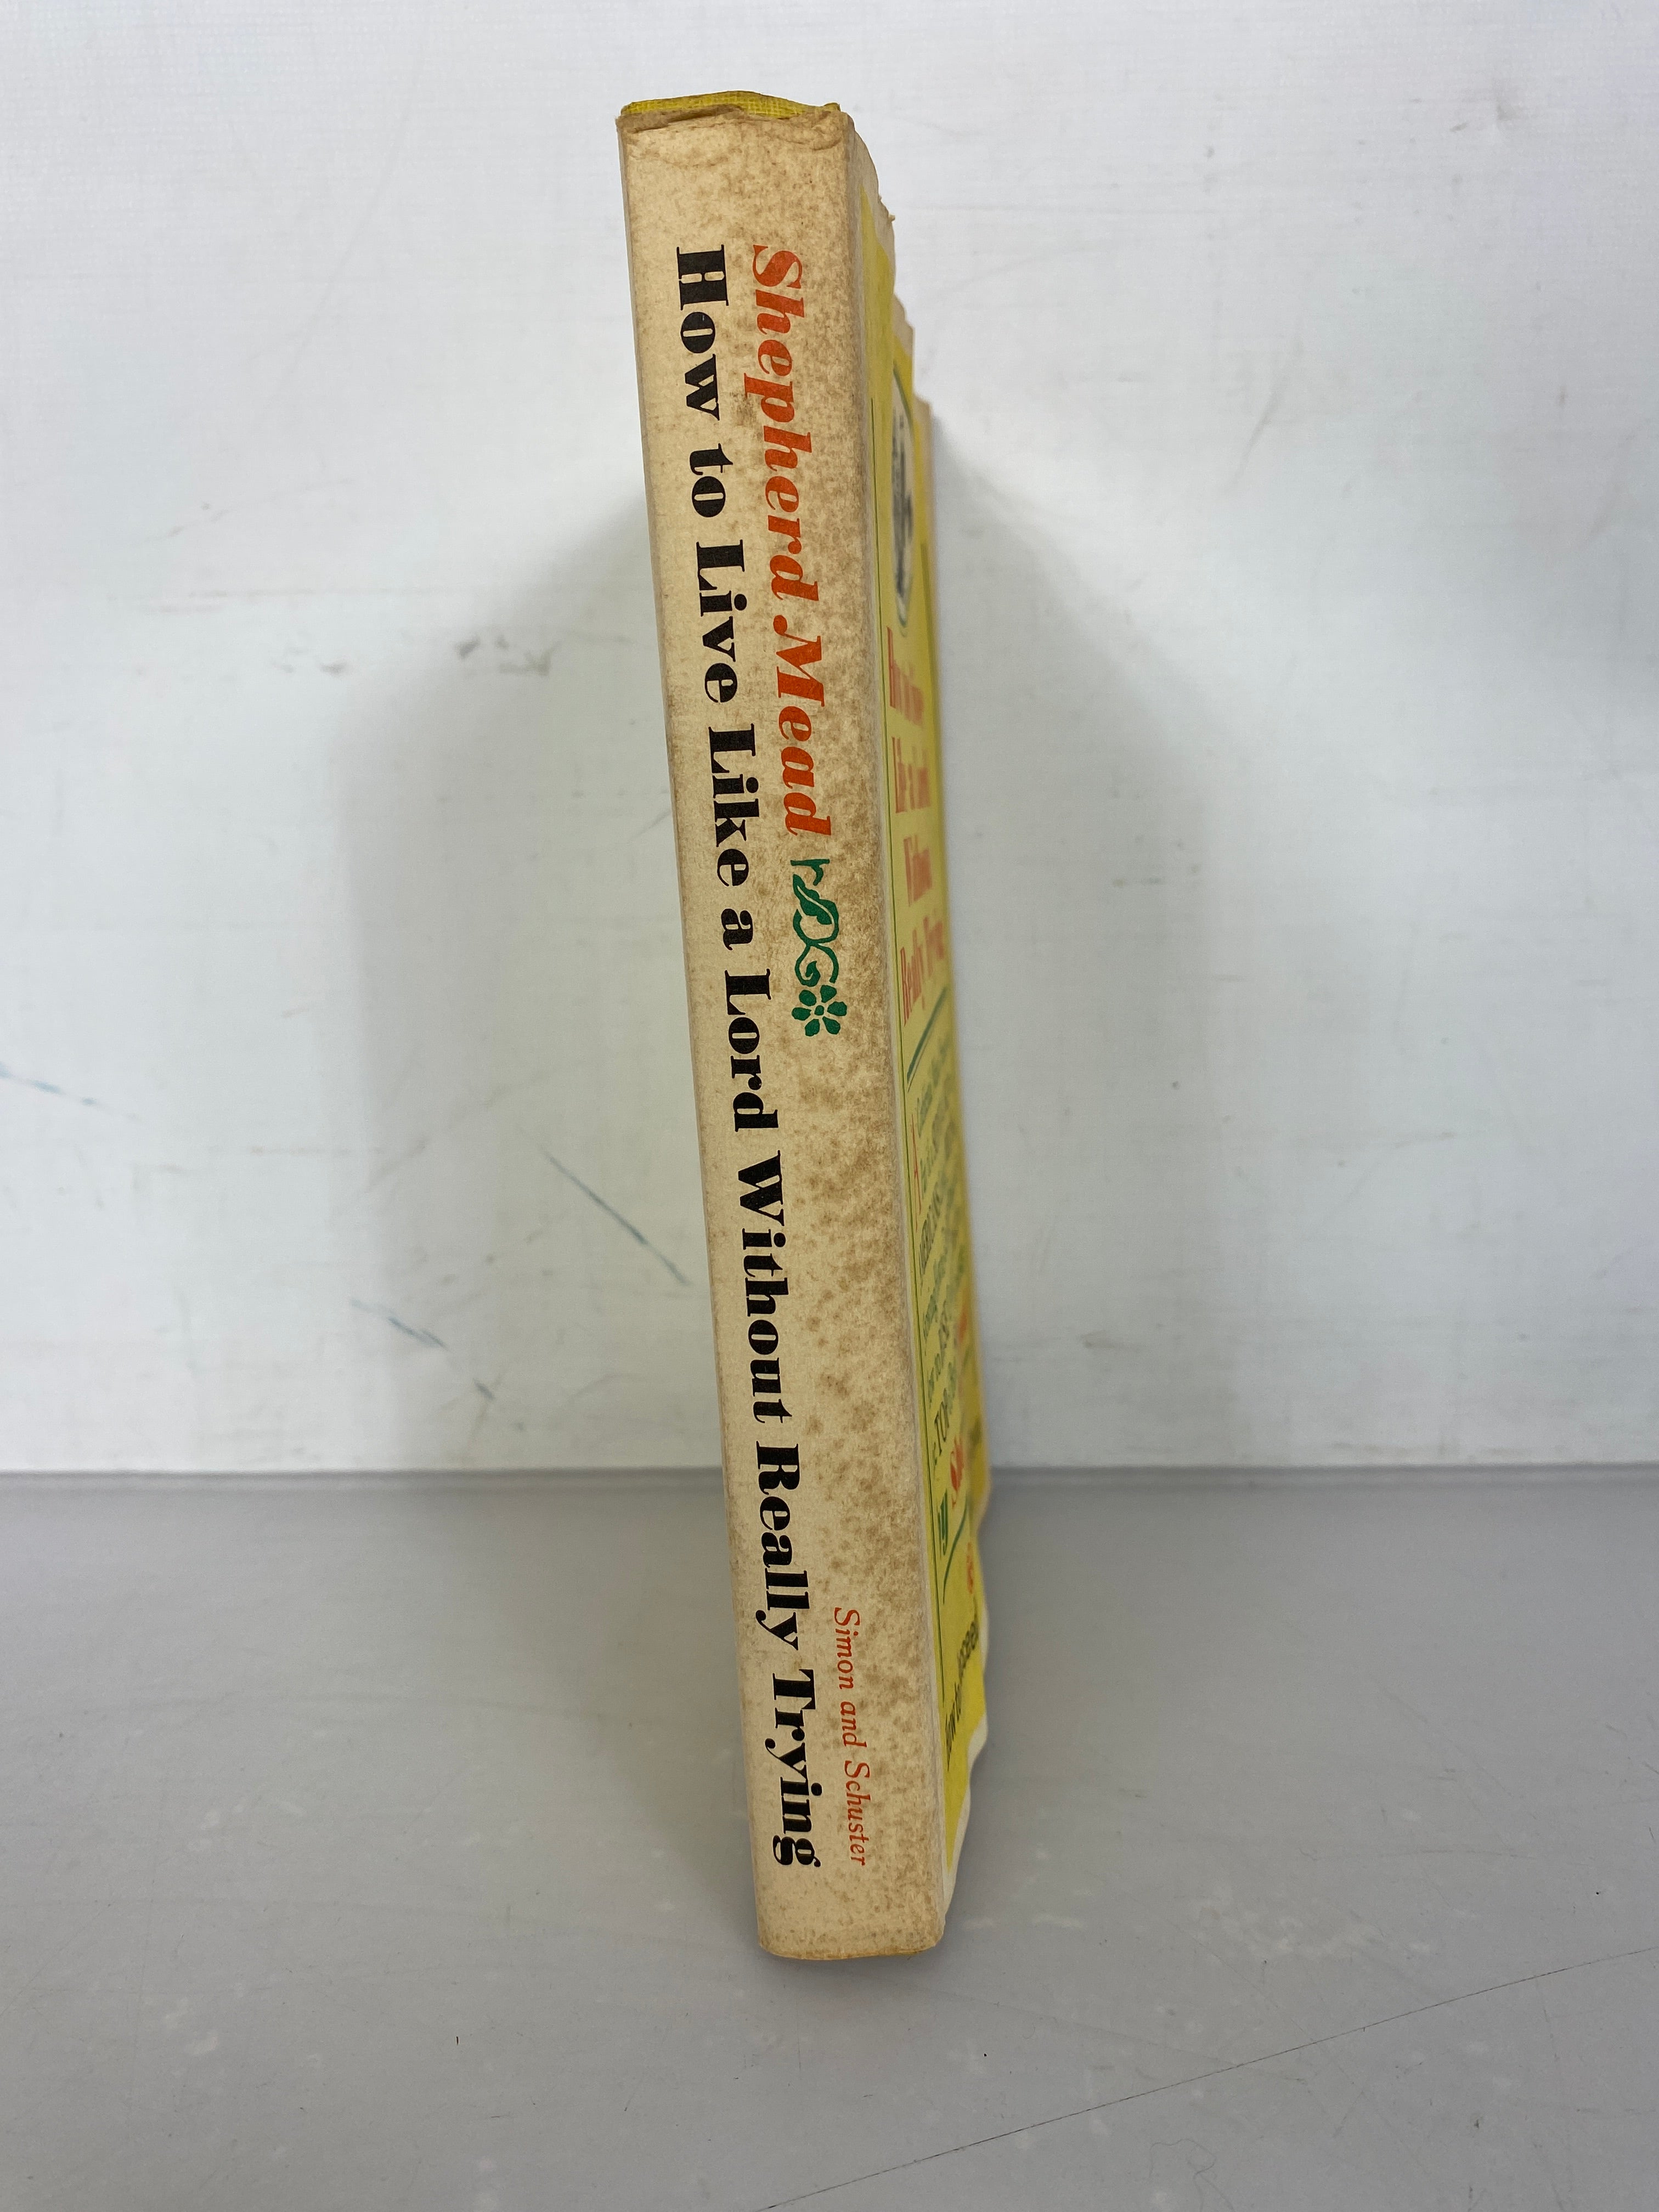 How to Live Like a Lord Without Really Trying by Mead 1964 Second Printing HC DJ Vintage